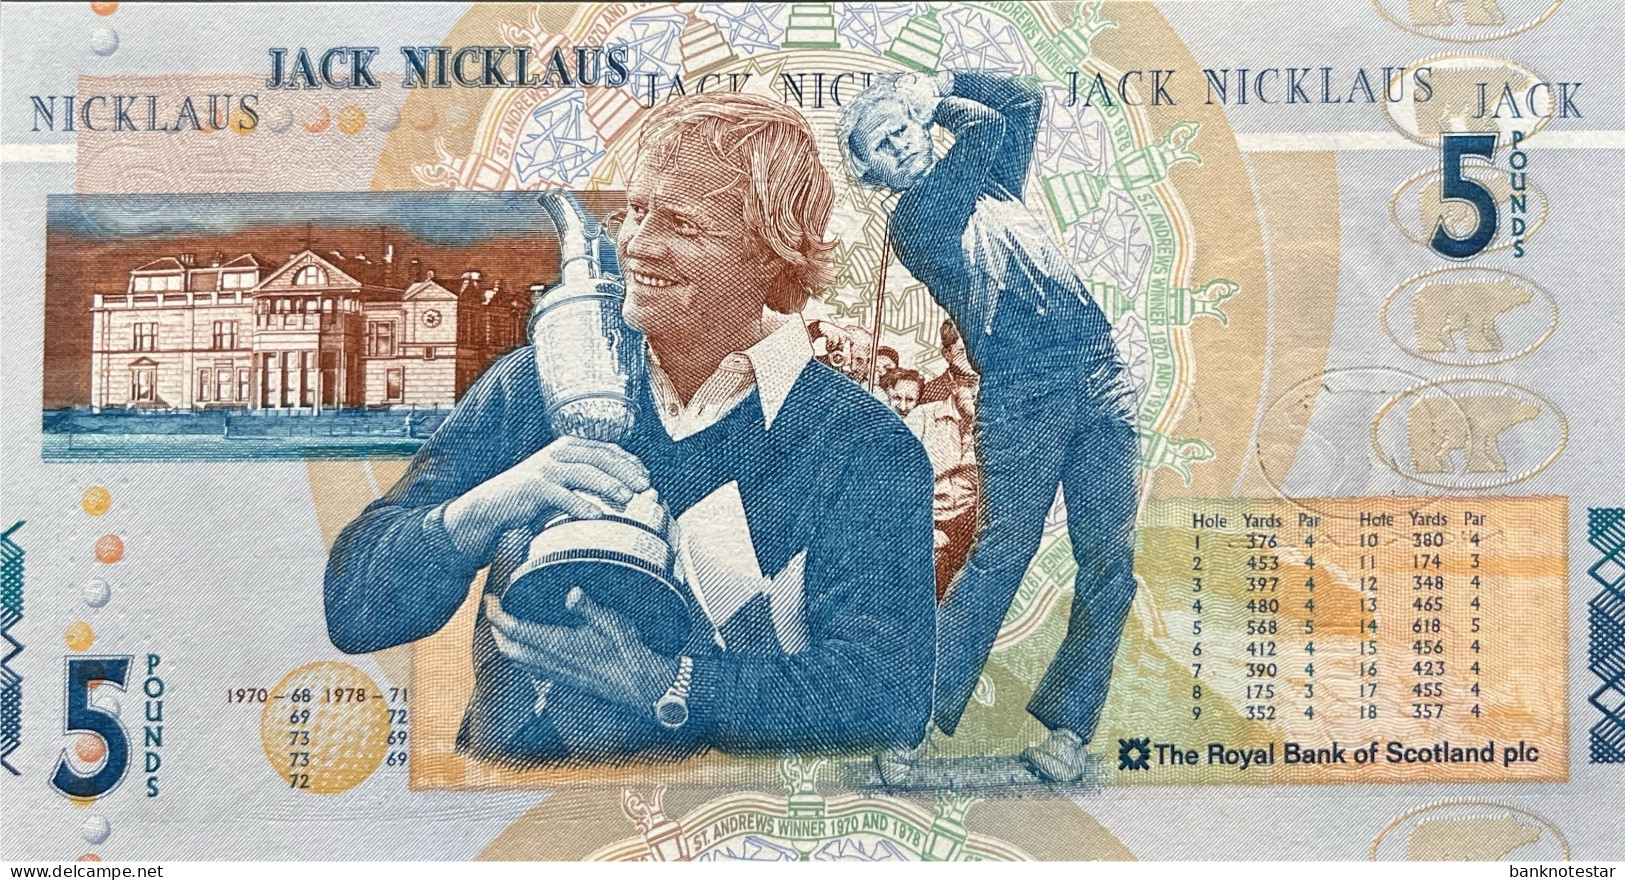 Scotland 5 Pounds, P-365 (14.7.2005) - UNC - Nicklaus Issue - 5 Pond